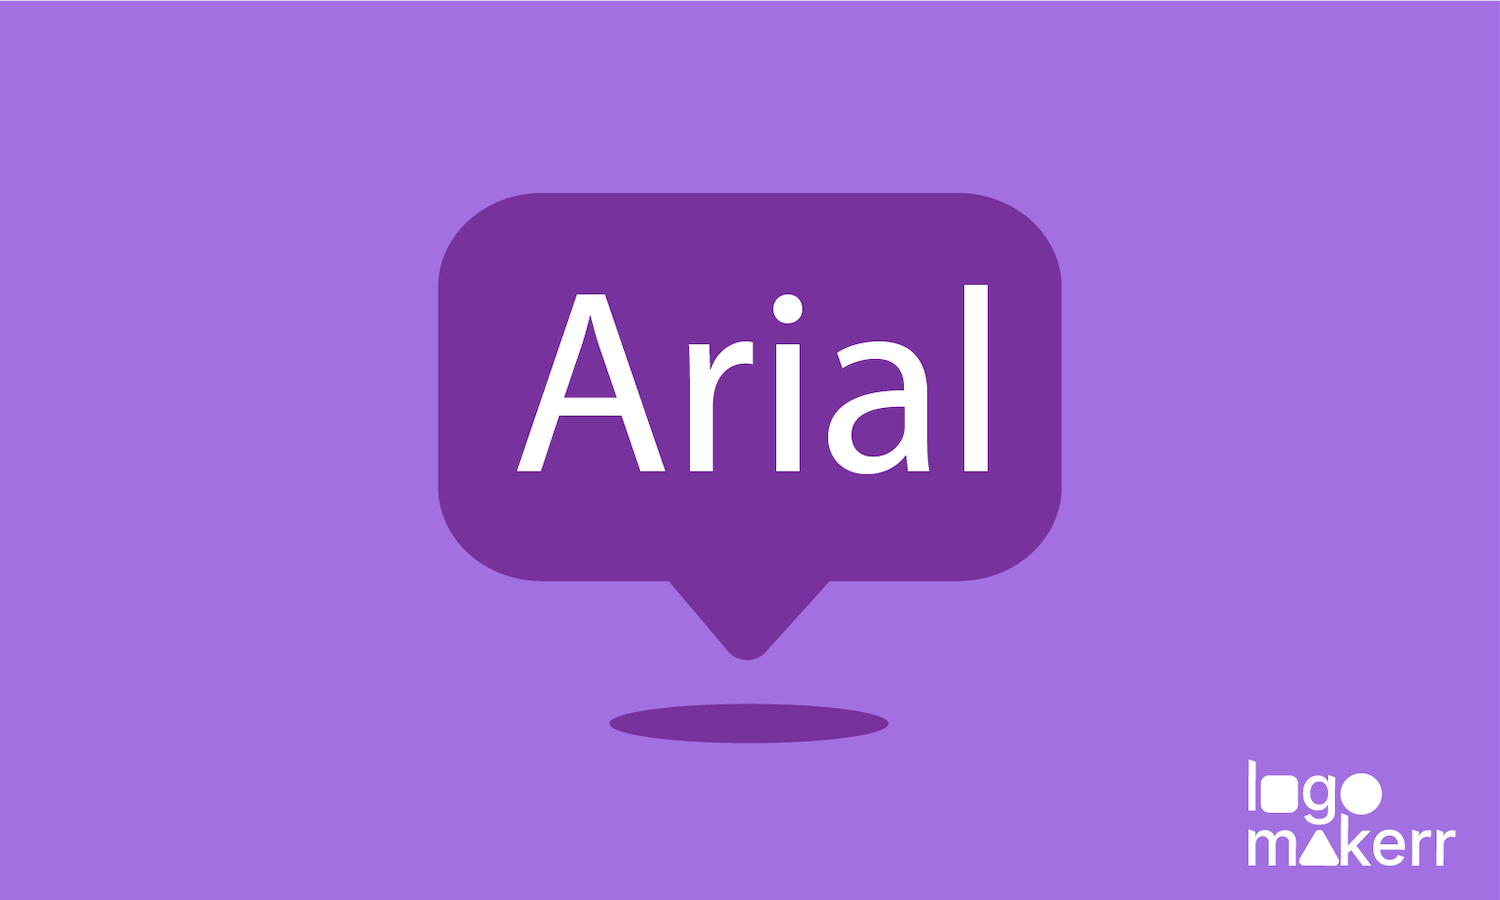 arial font in a dialog box in purple